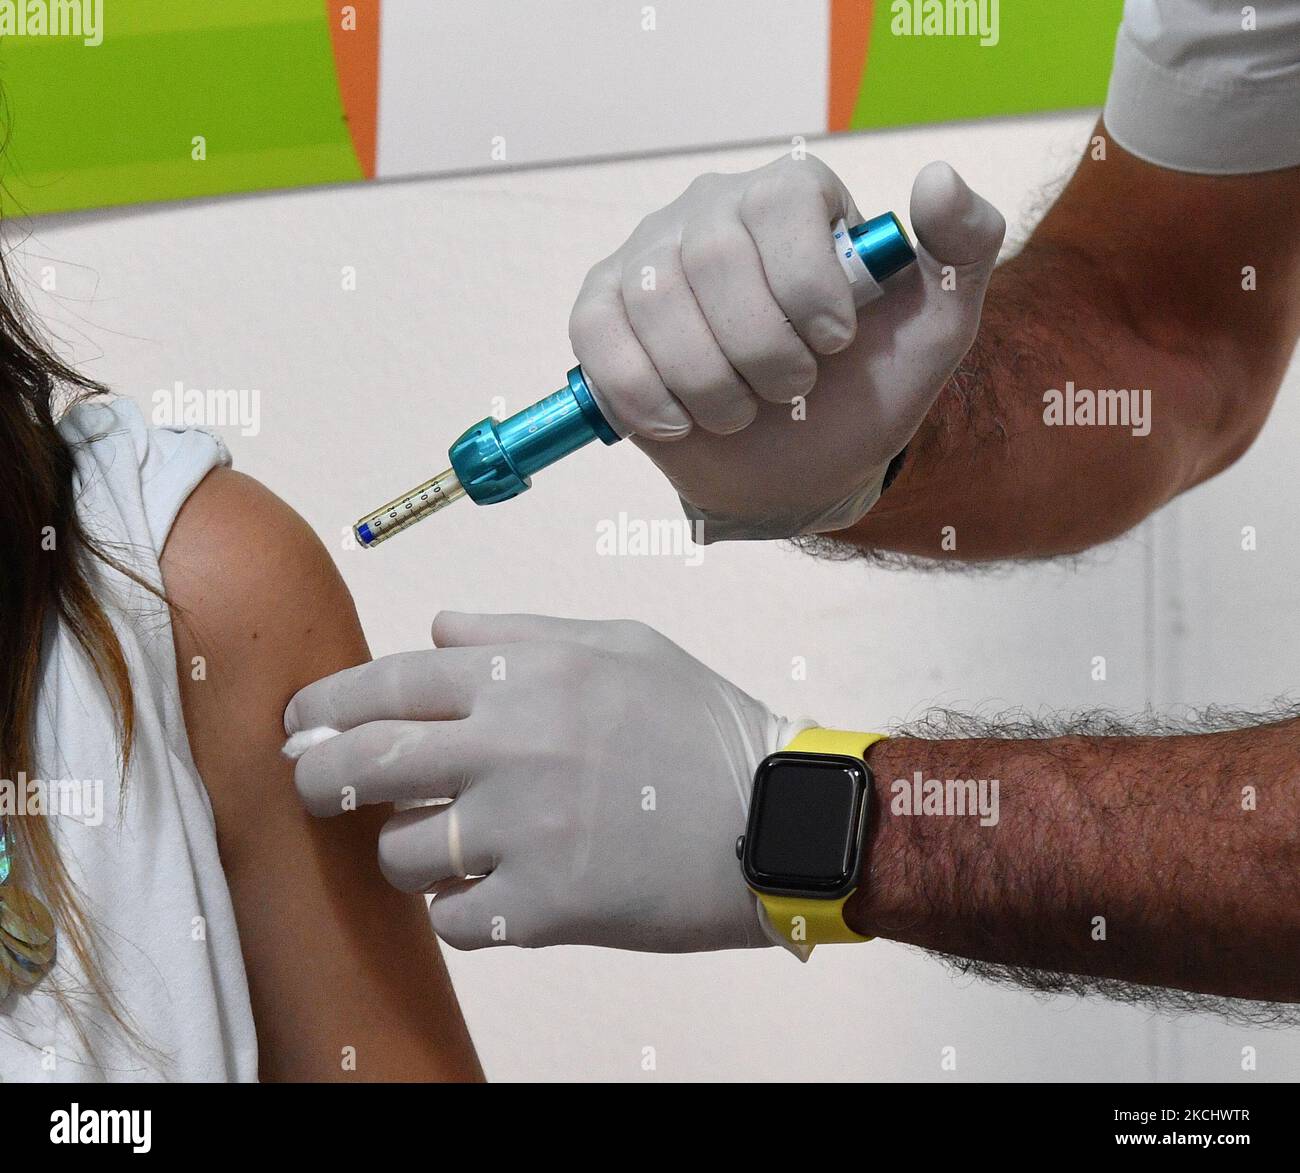 The 'Comfort-in' syringe without needle was used for the first time in Europe in the Messina vaccination center. Messina (Italy), July 28,2021 (Photo by Gabriele Maricchiolo/NurPhoto) Stock Photo